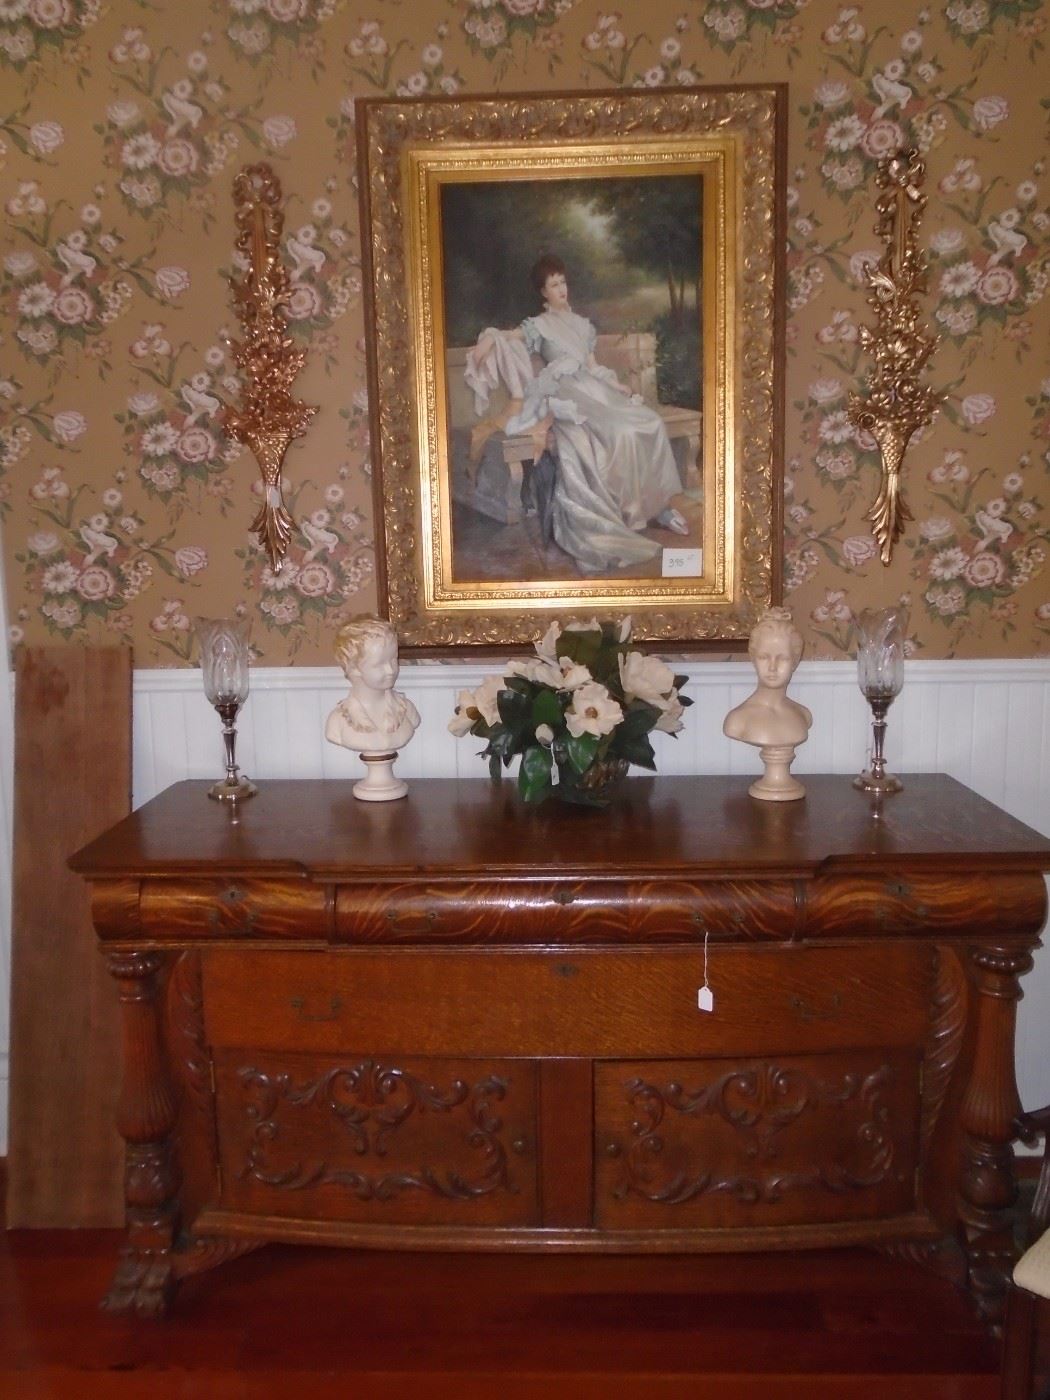 Several portraits and lovely antique furniture